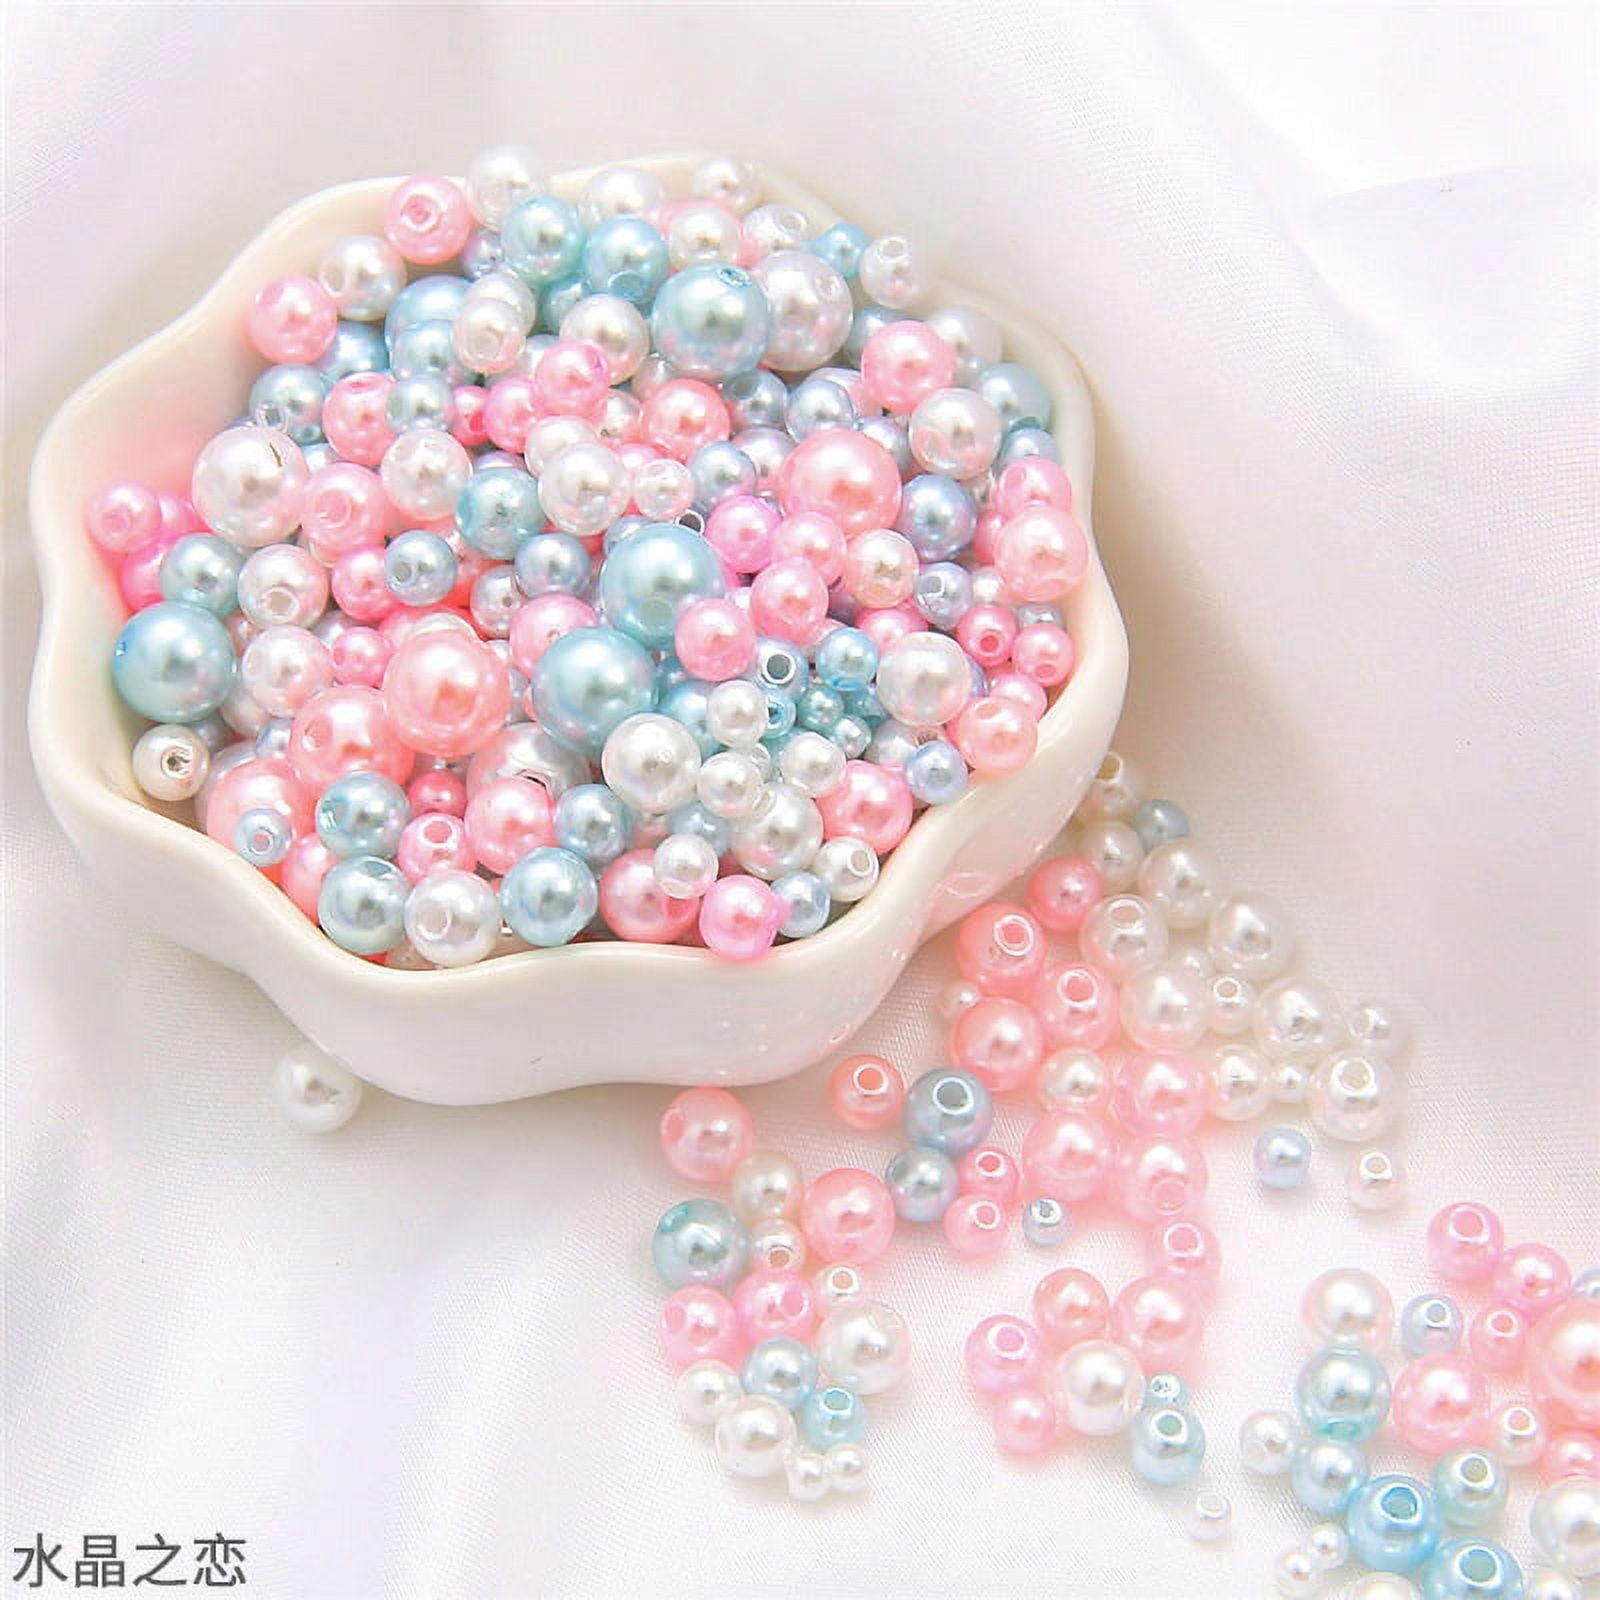 1400 Pieces Craft Pearl Beads with Holes Assorted Size Loose Faux Plastic  Pearls 3 mm 4 mm 5 mm 6 mm 8 mm 10 mm 12 mm Full Round Spacers for Jewelry  Making Sewing Crafting (White)